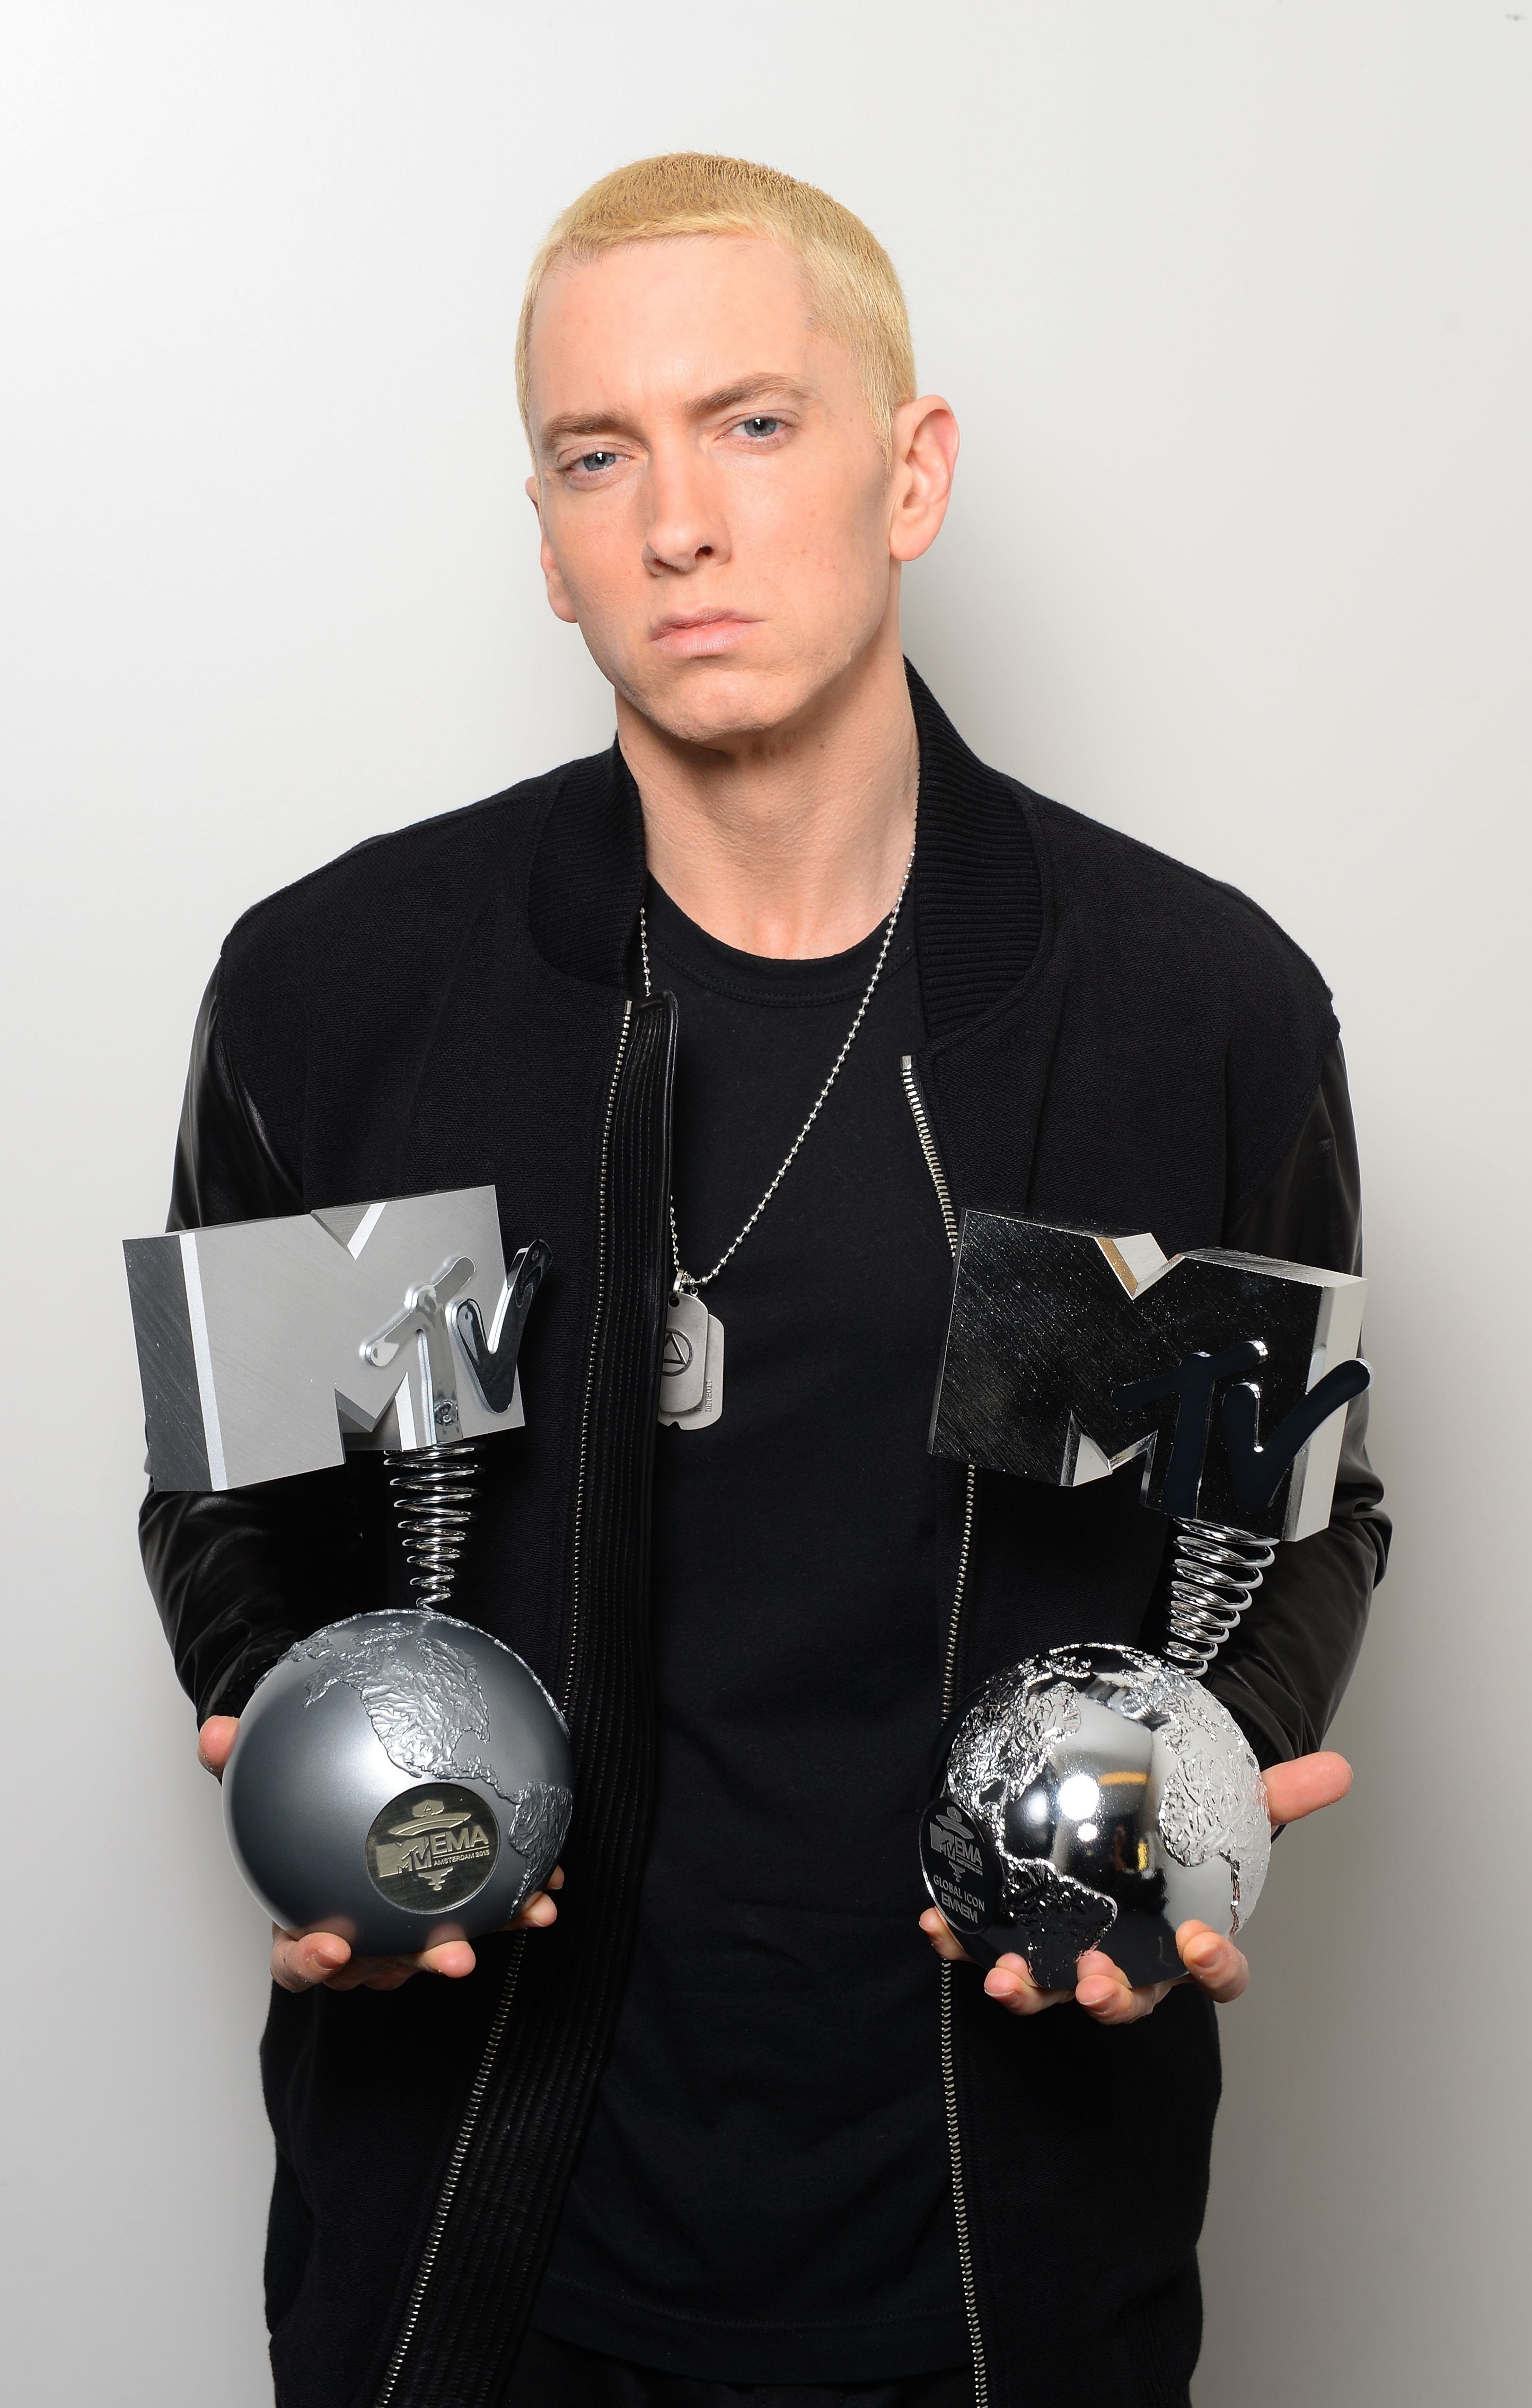  Eminem poses in his dressing room with the 'Best Hip Hop' and 'Global Icon' awards during the MTV EMA's 2013 at the Ziggo Dome on November 10, 2013 | Photo: Getty Images